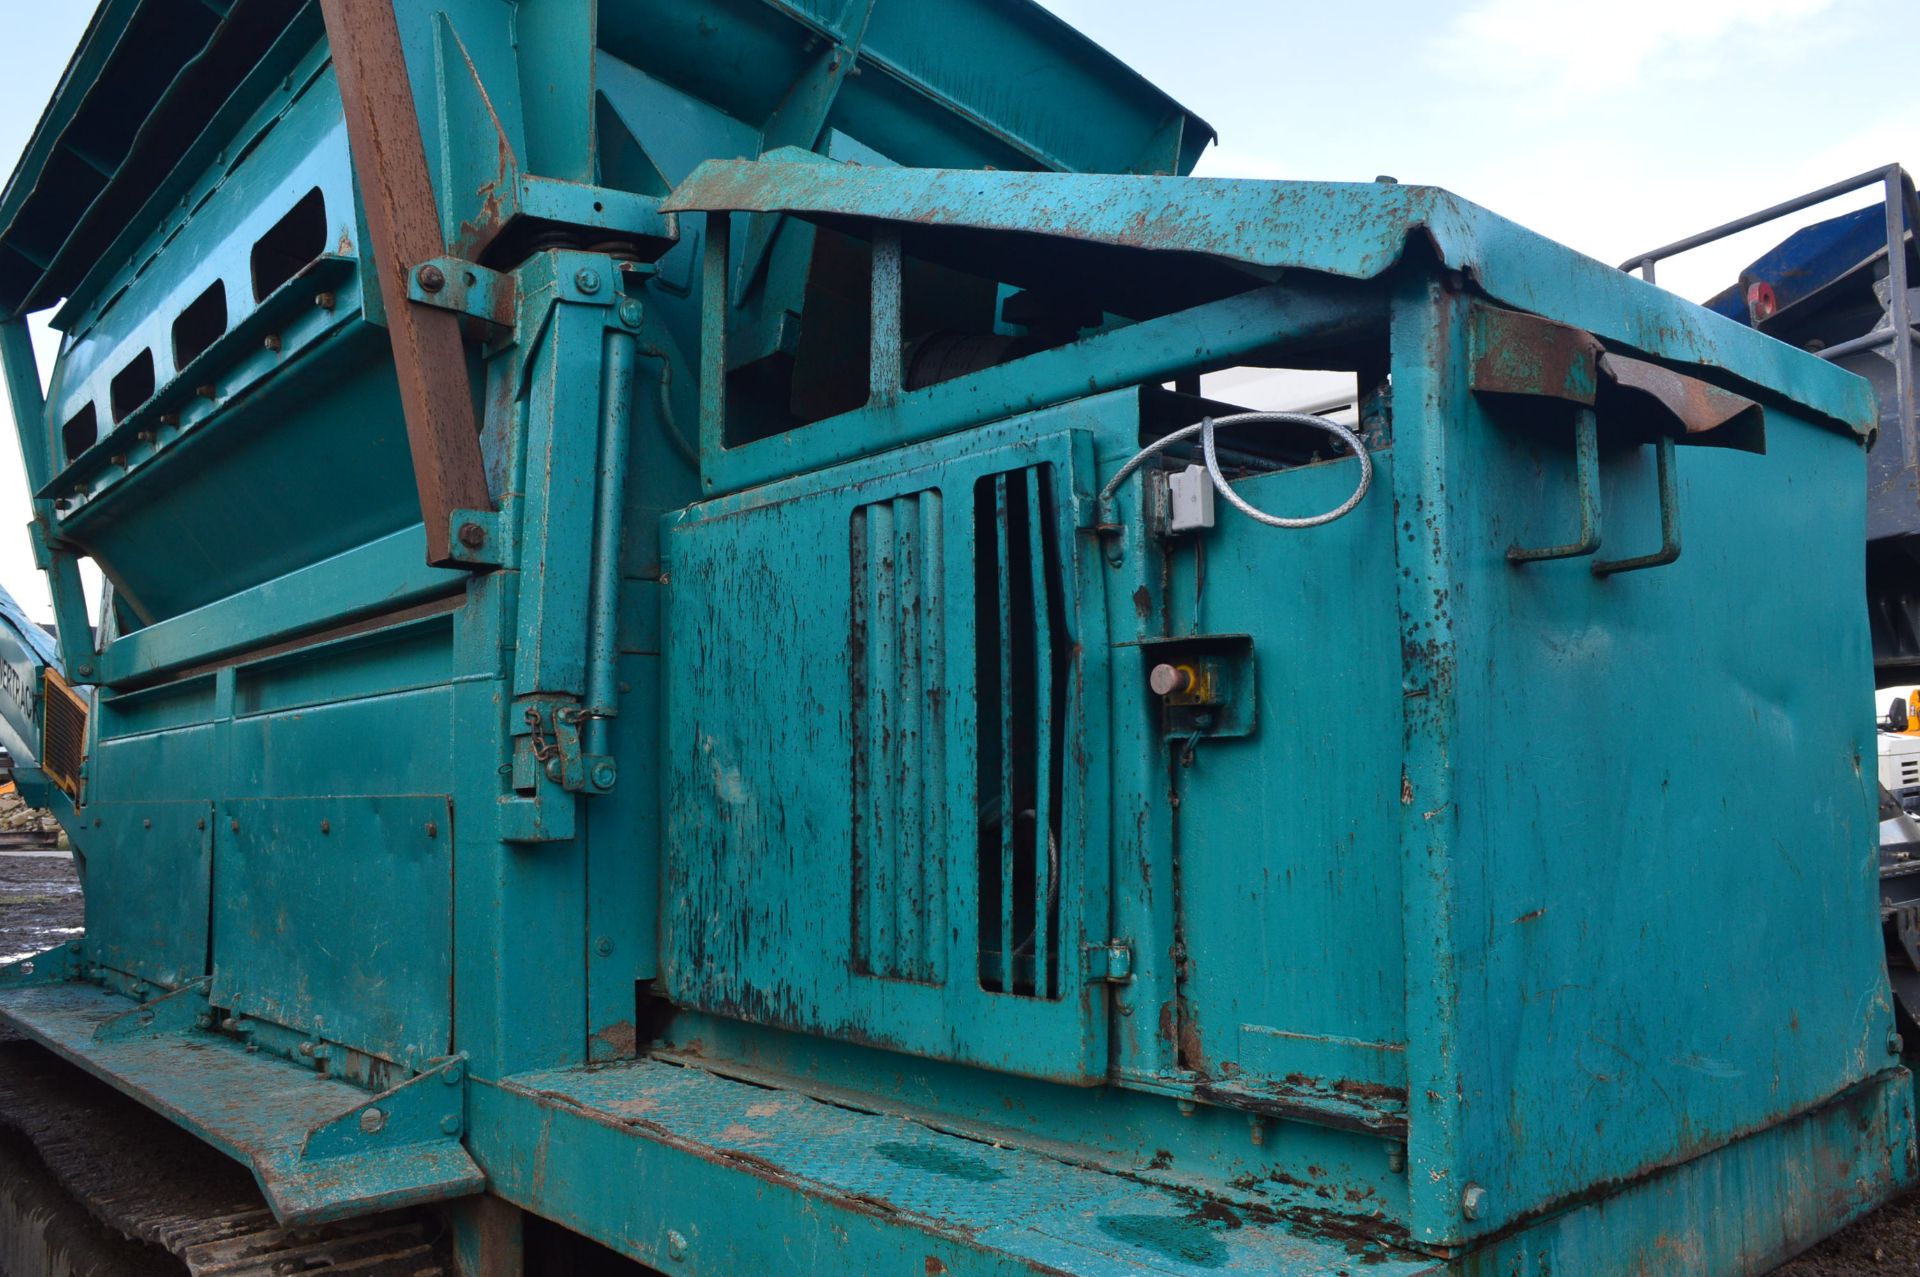 Powerscreen POWER TRACK MOUNTED AGGREGATE SCREEN, serial no. 72 15 651, indicated hours 8429 (at - Image 3 of 7